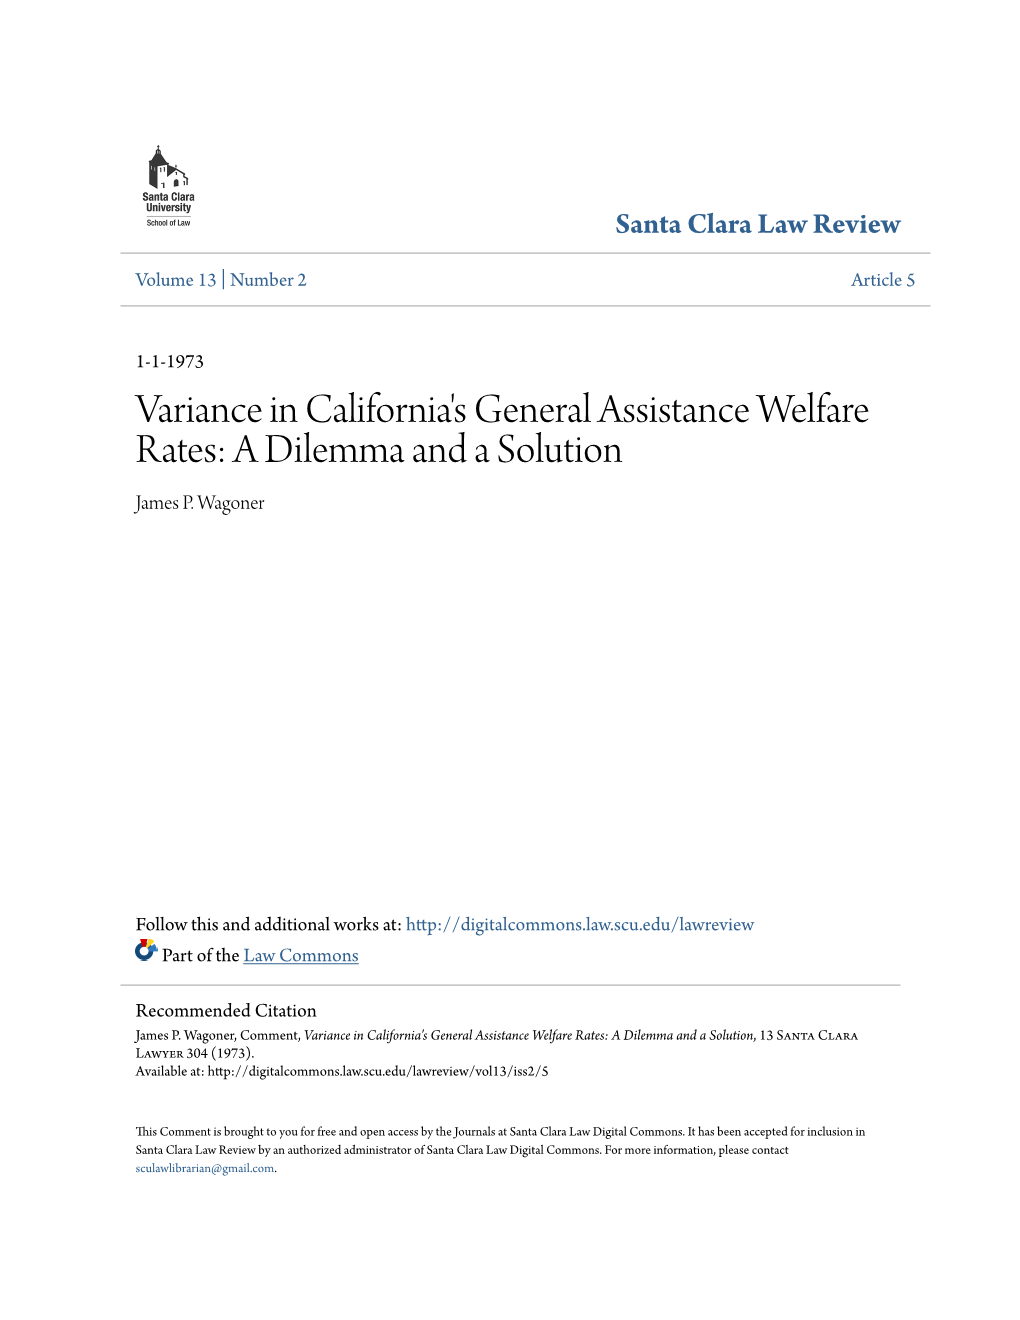 Variance in California's General Assistance Welfare Rates: a Dilemma and a Solution James P